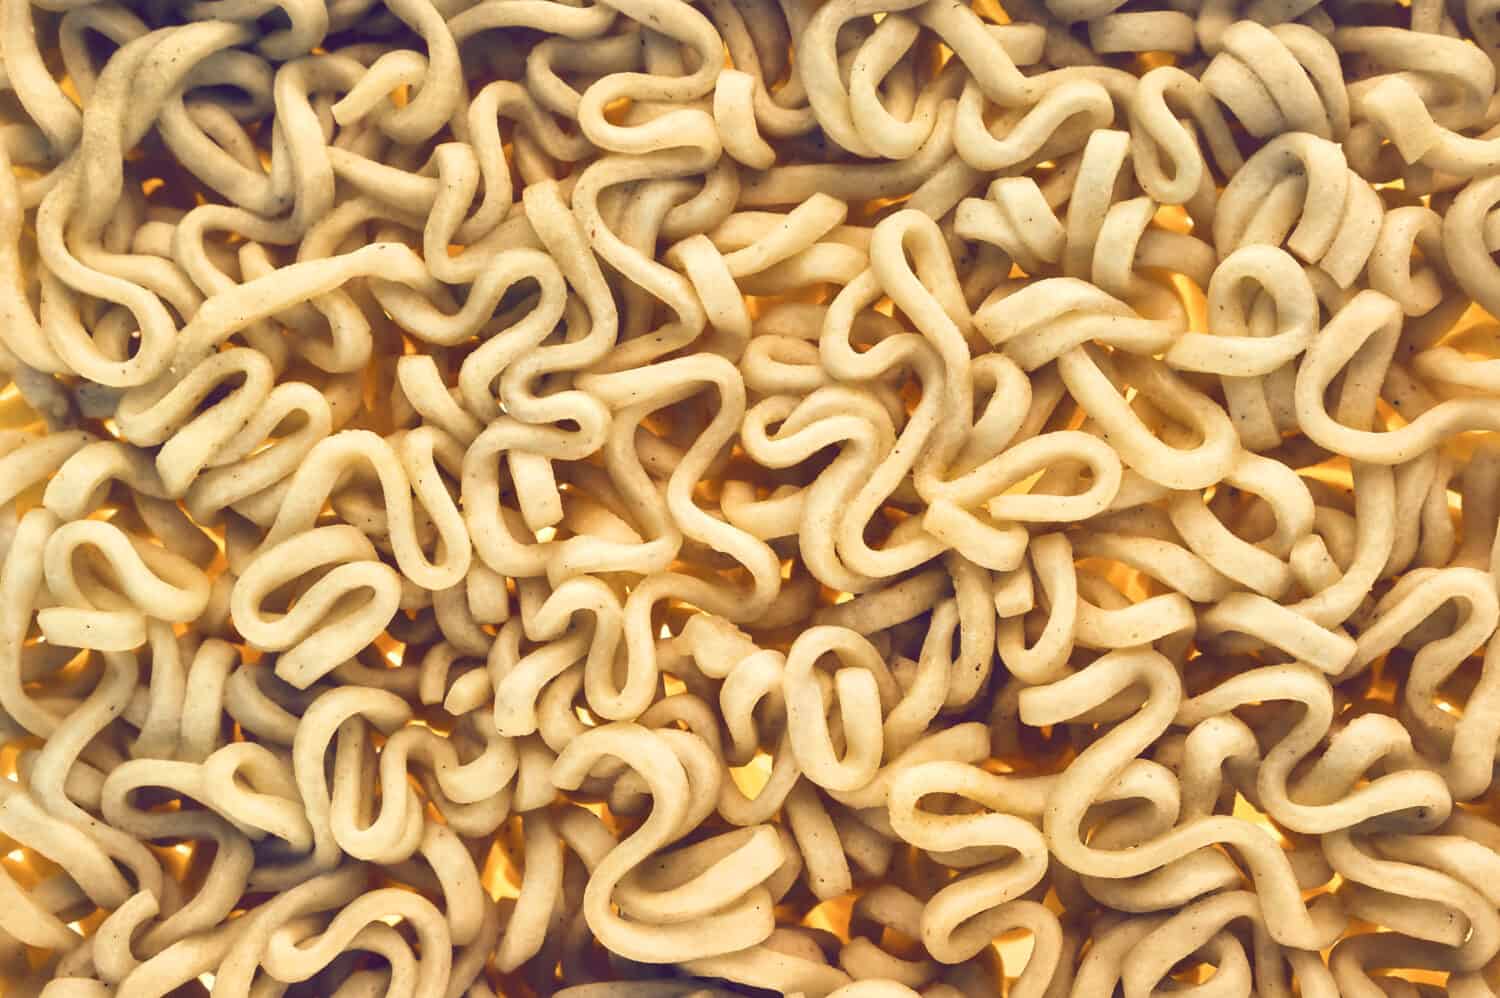 Close-up View of Dried Instant Noodles, Ramen. Workaholic, Student Meal Concept.